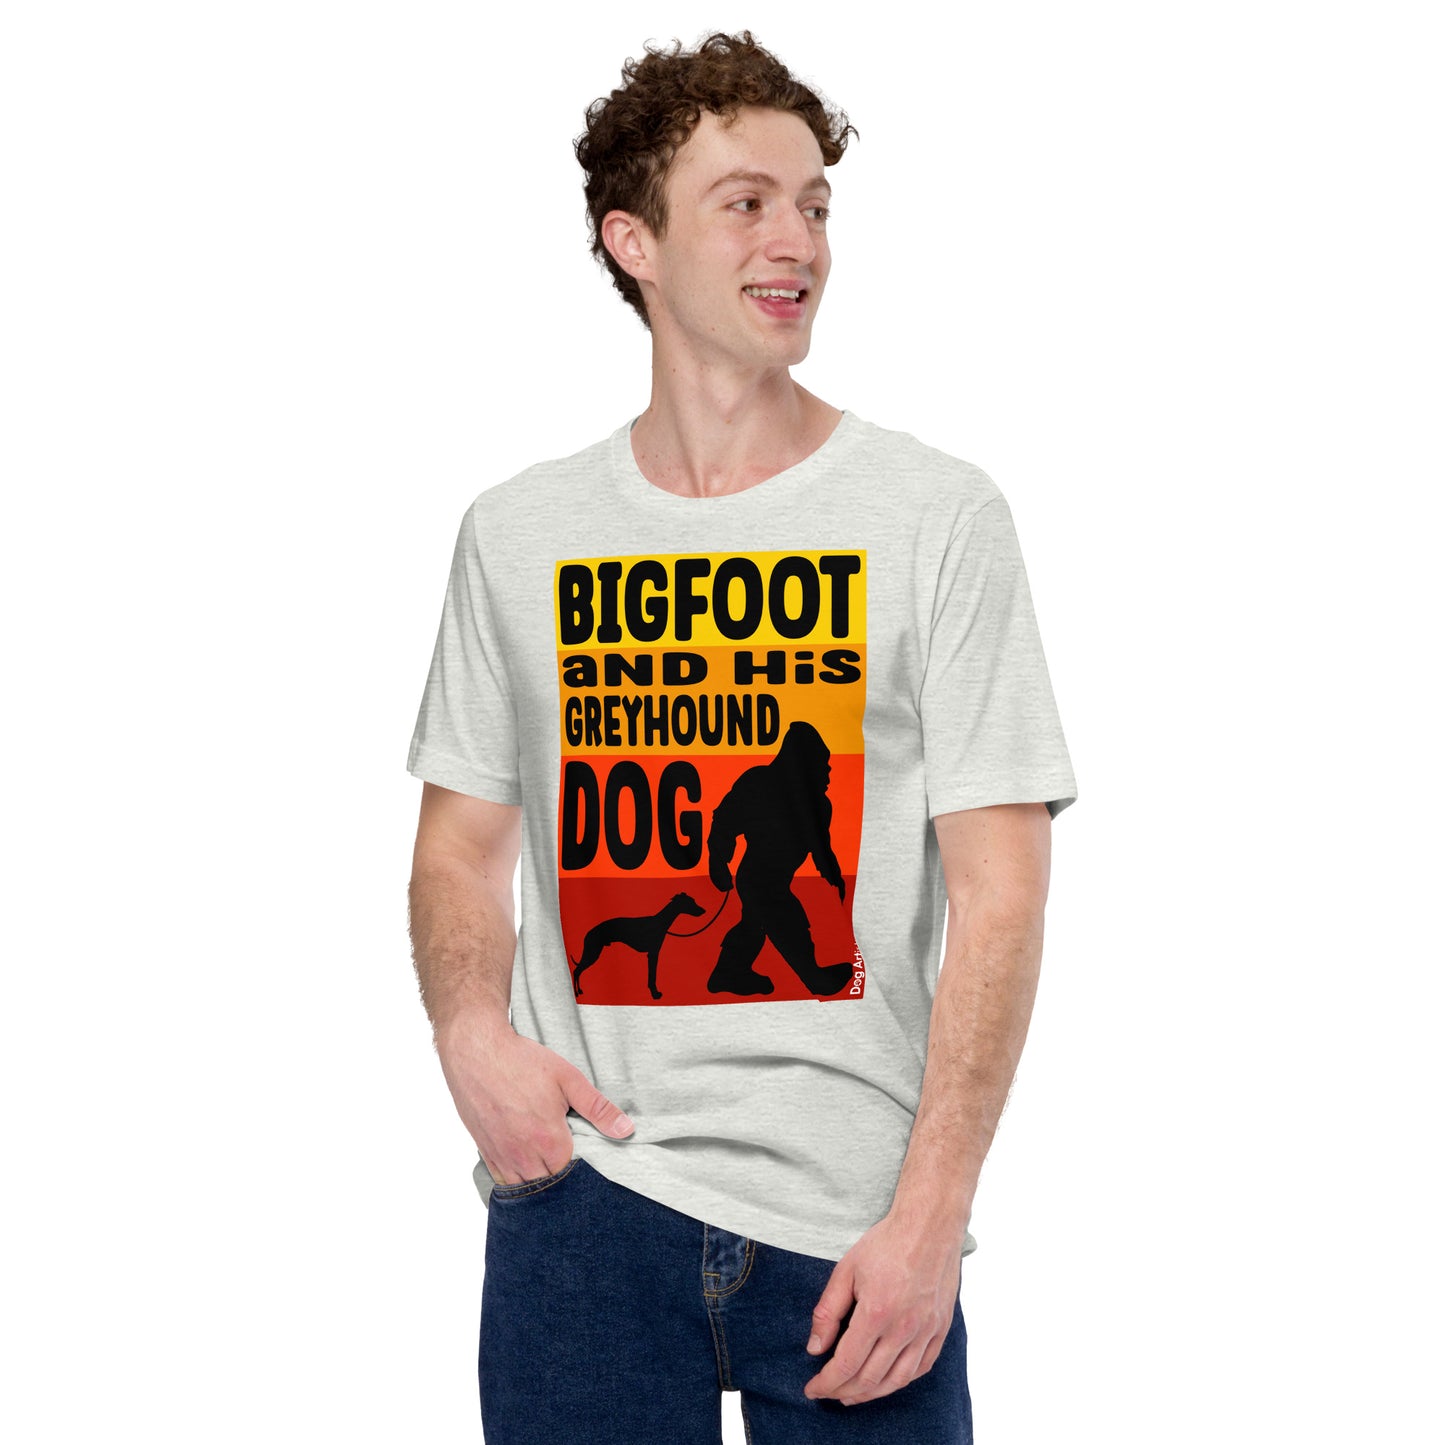 Bigfoot and his Greyhound unisex ash t-shirt by Dog Artistry.